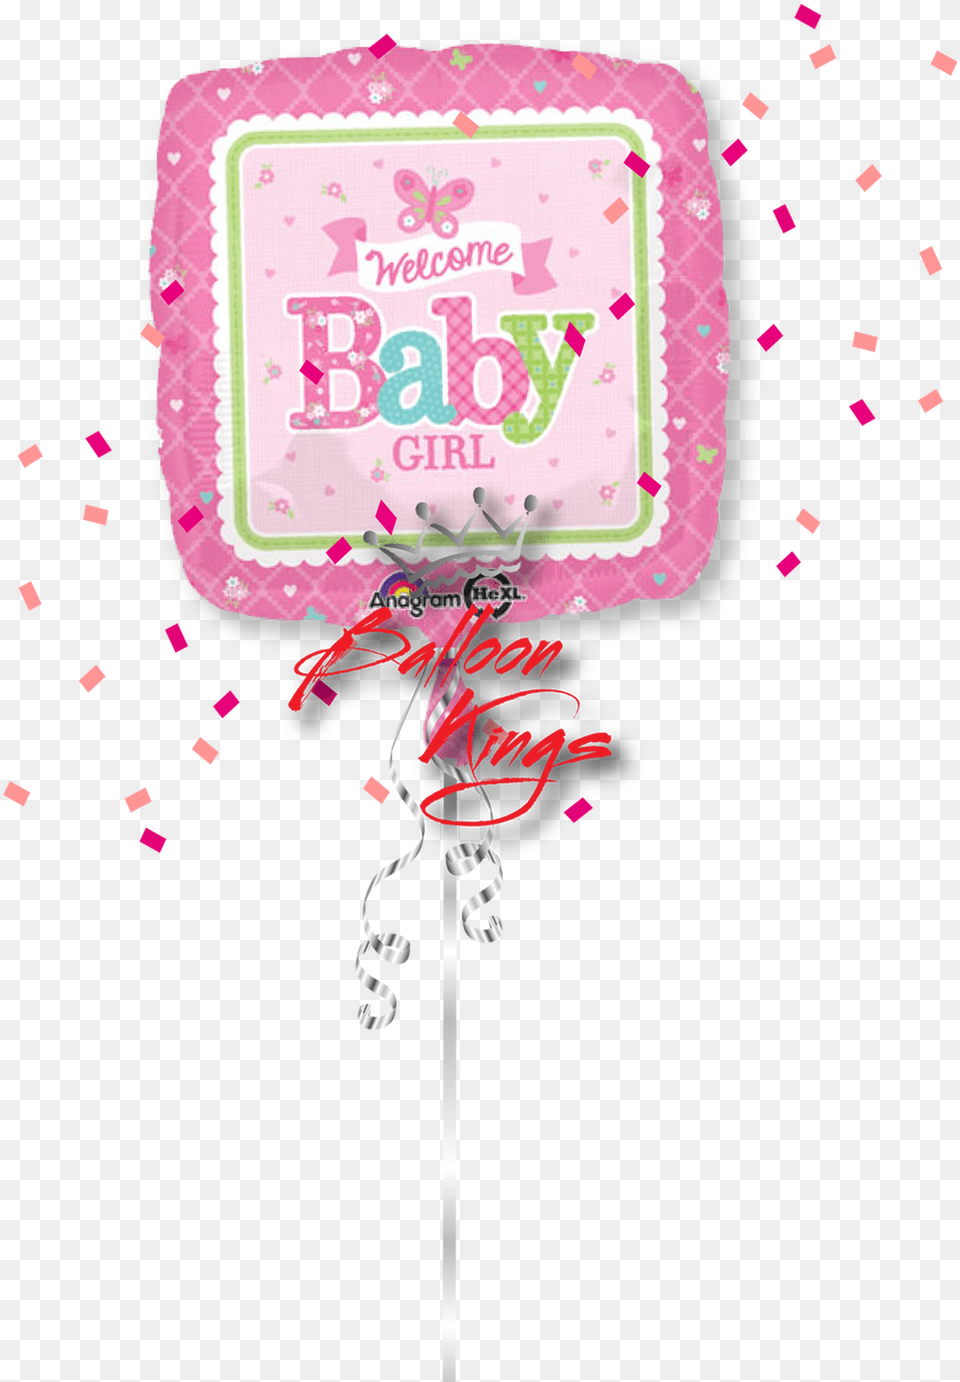 Welcome Baby Girl Butterfly Graphic Design, Birthday Cake, Cake, Cream, Dessert Png